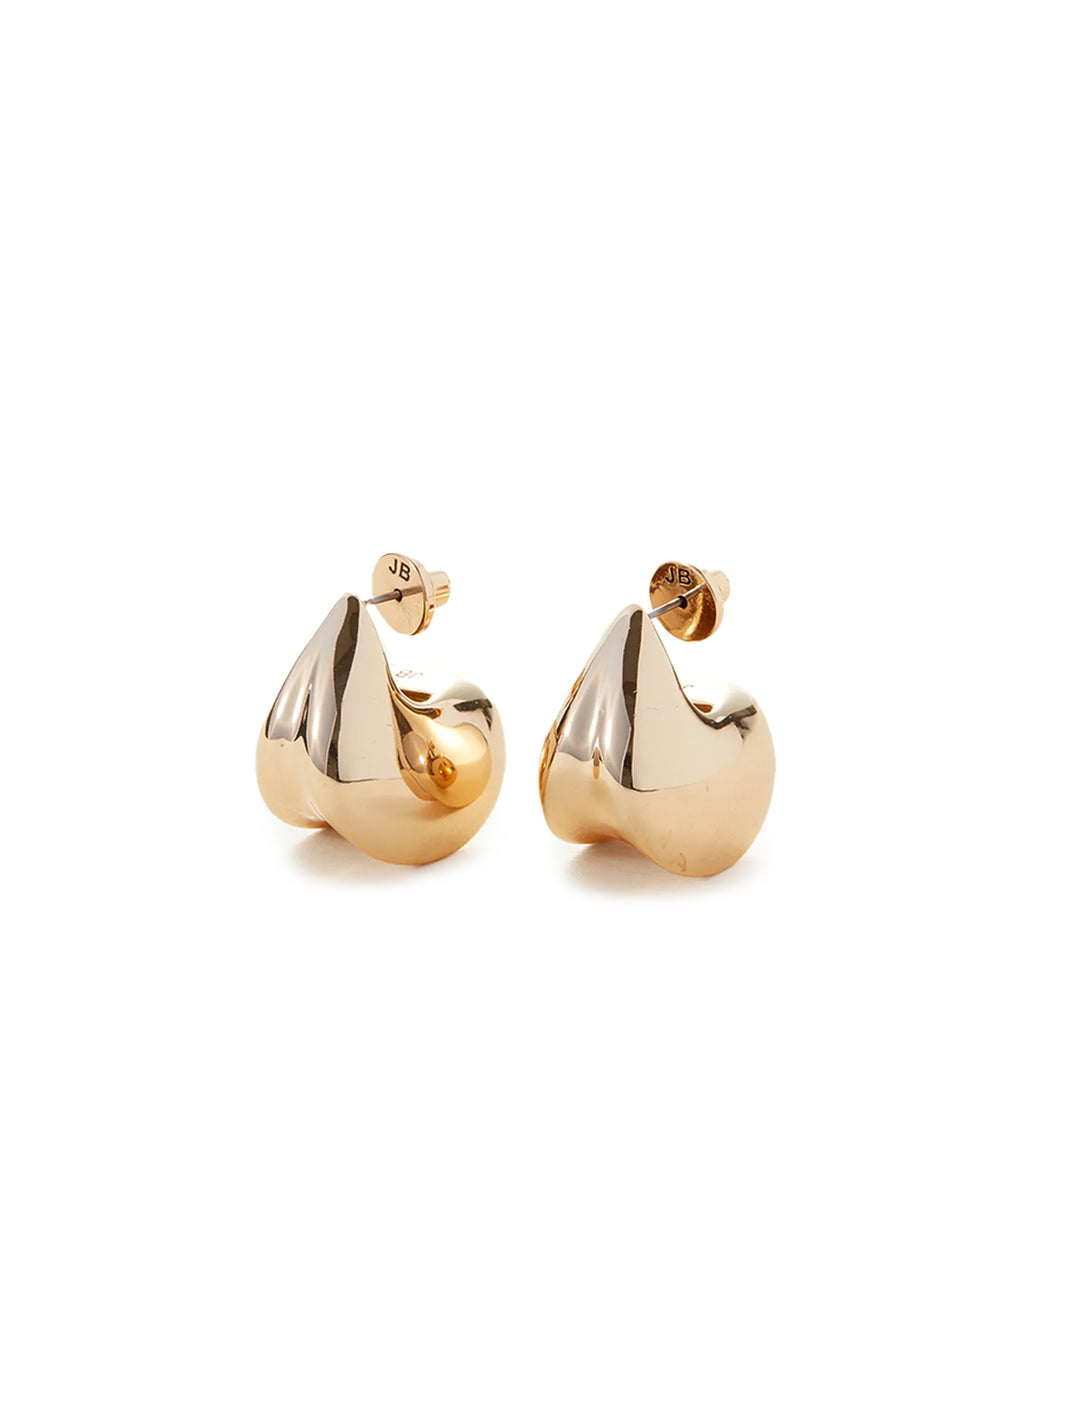 Alternative front view of Jenny Bird's nouveaux puff earrings in gold.